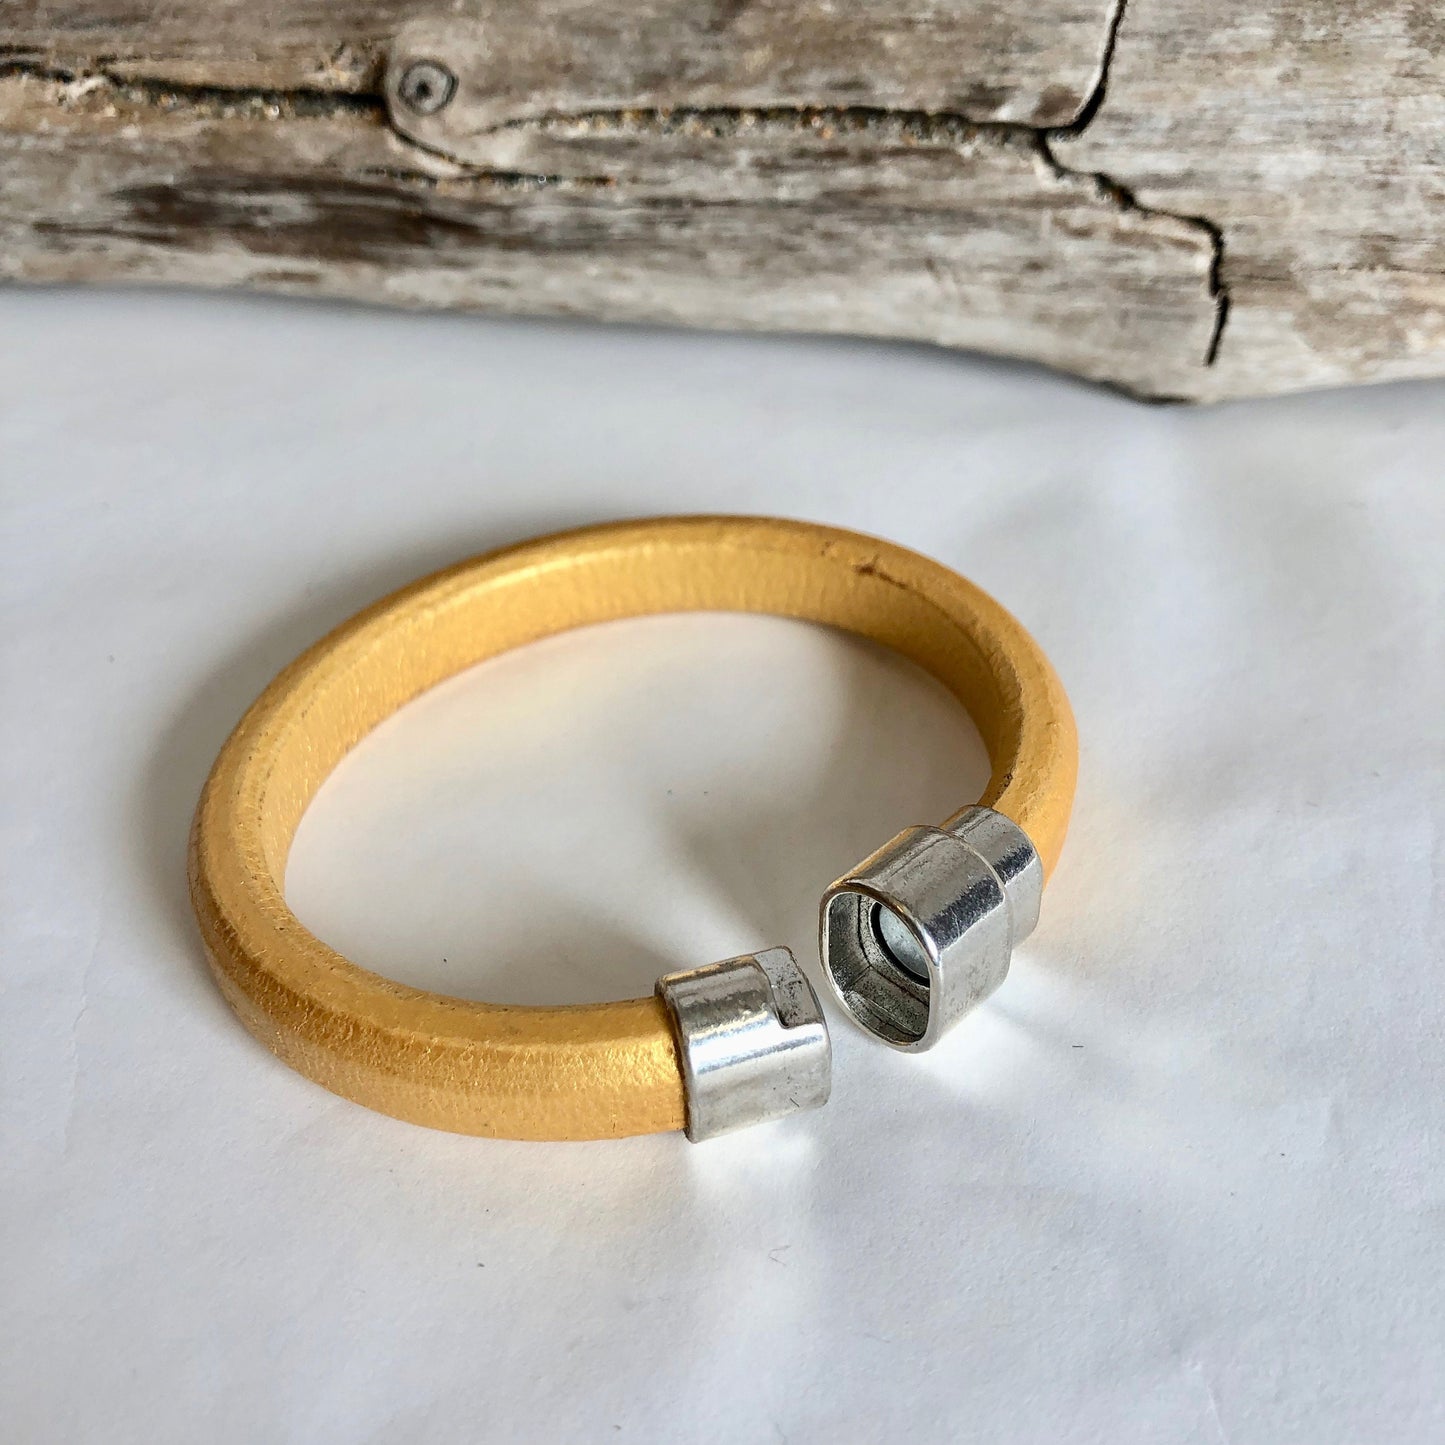 Leather bracelet, made of fine gold Italian licorice leather, finished with a quality silver magnetic bullet style clasp.